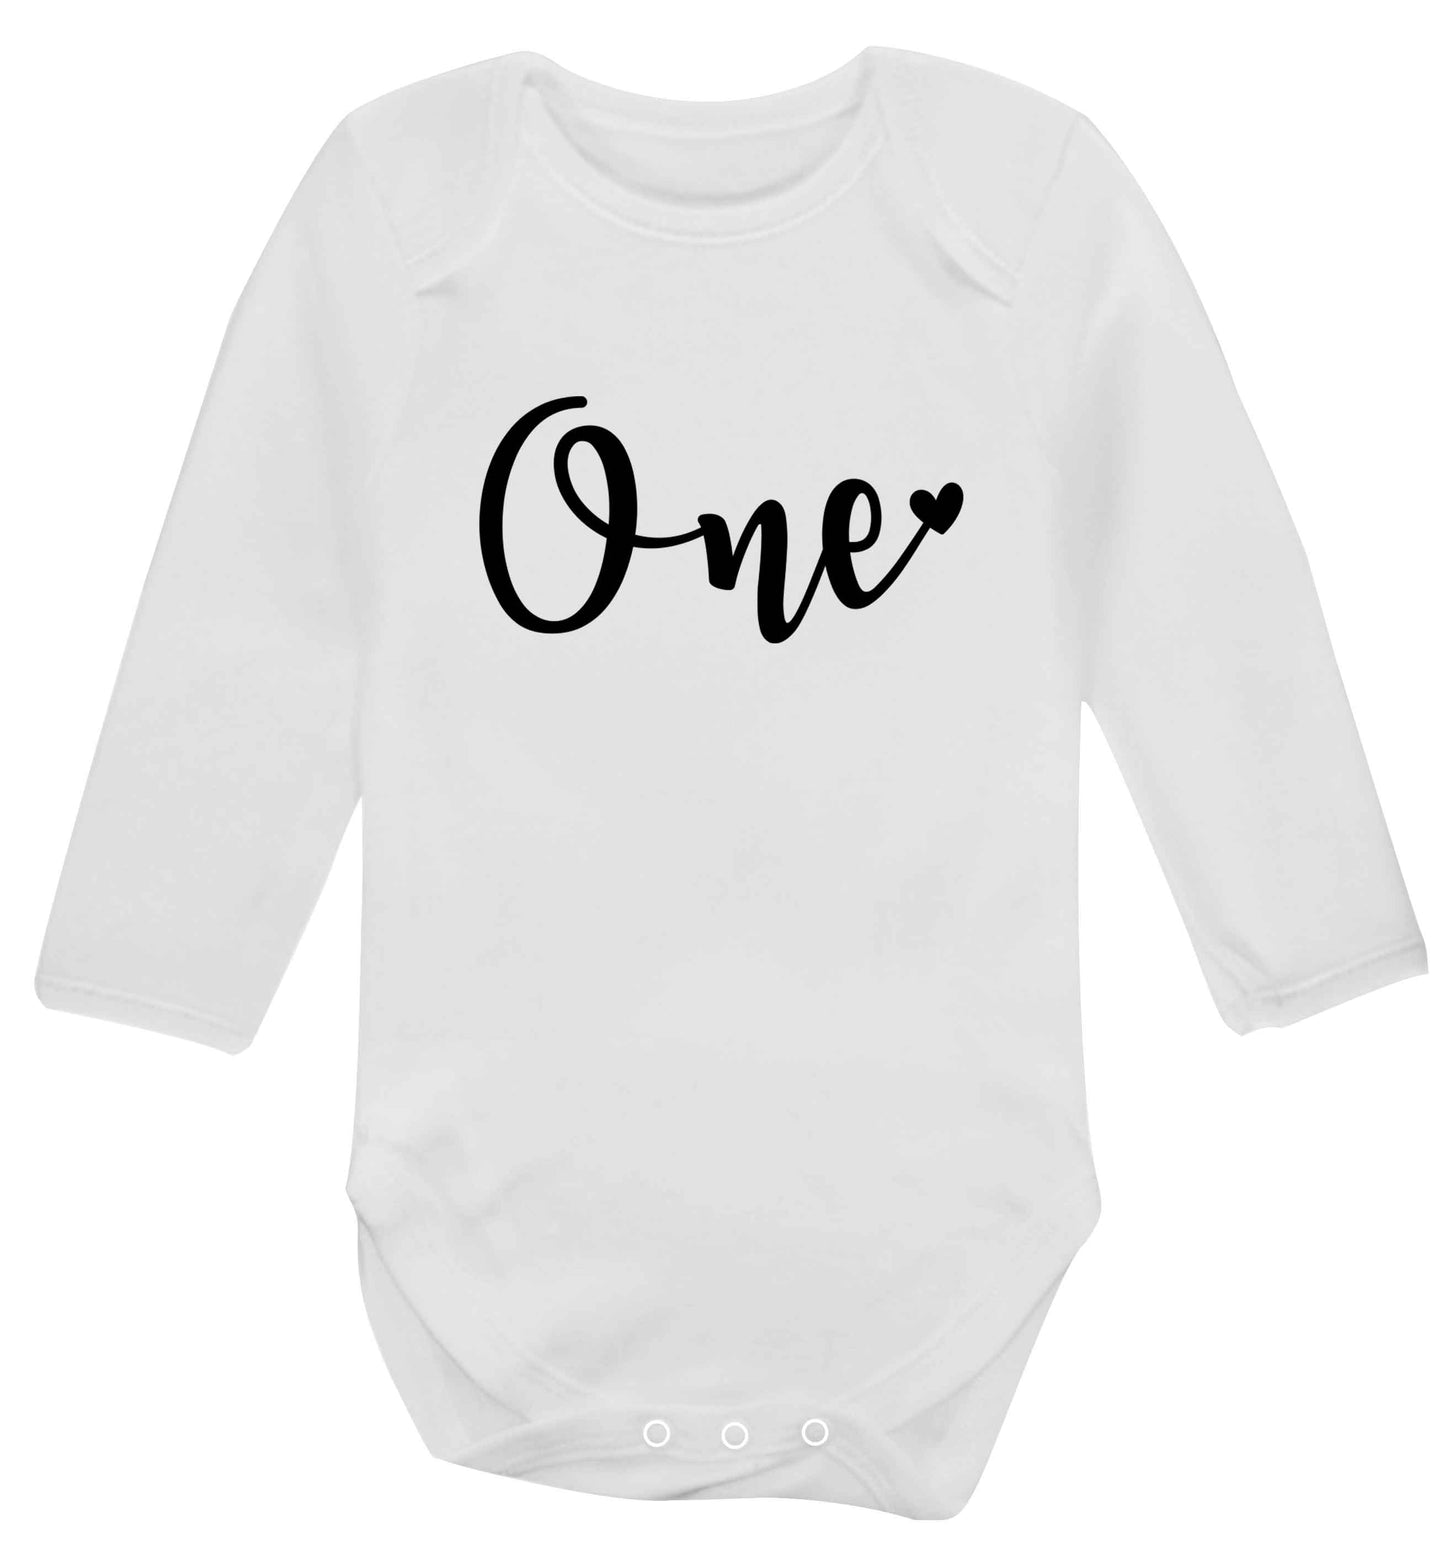 One baby vest long sleeved white 6-12 months